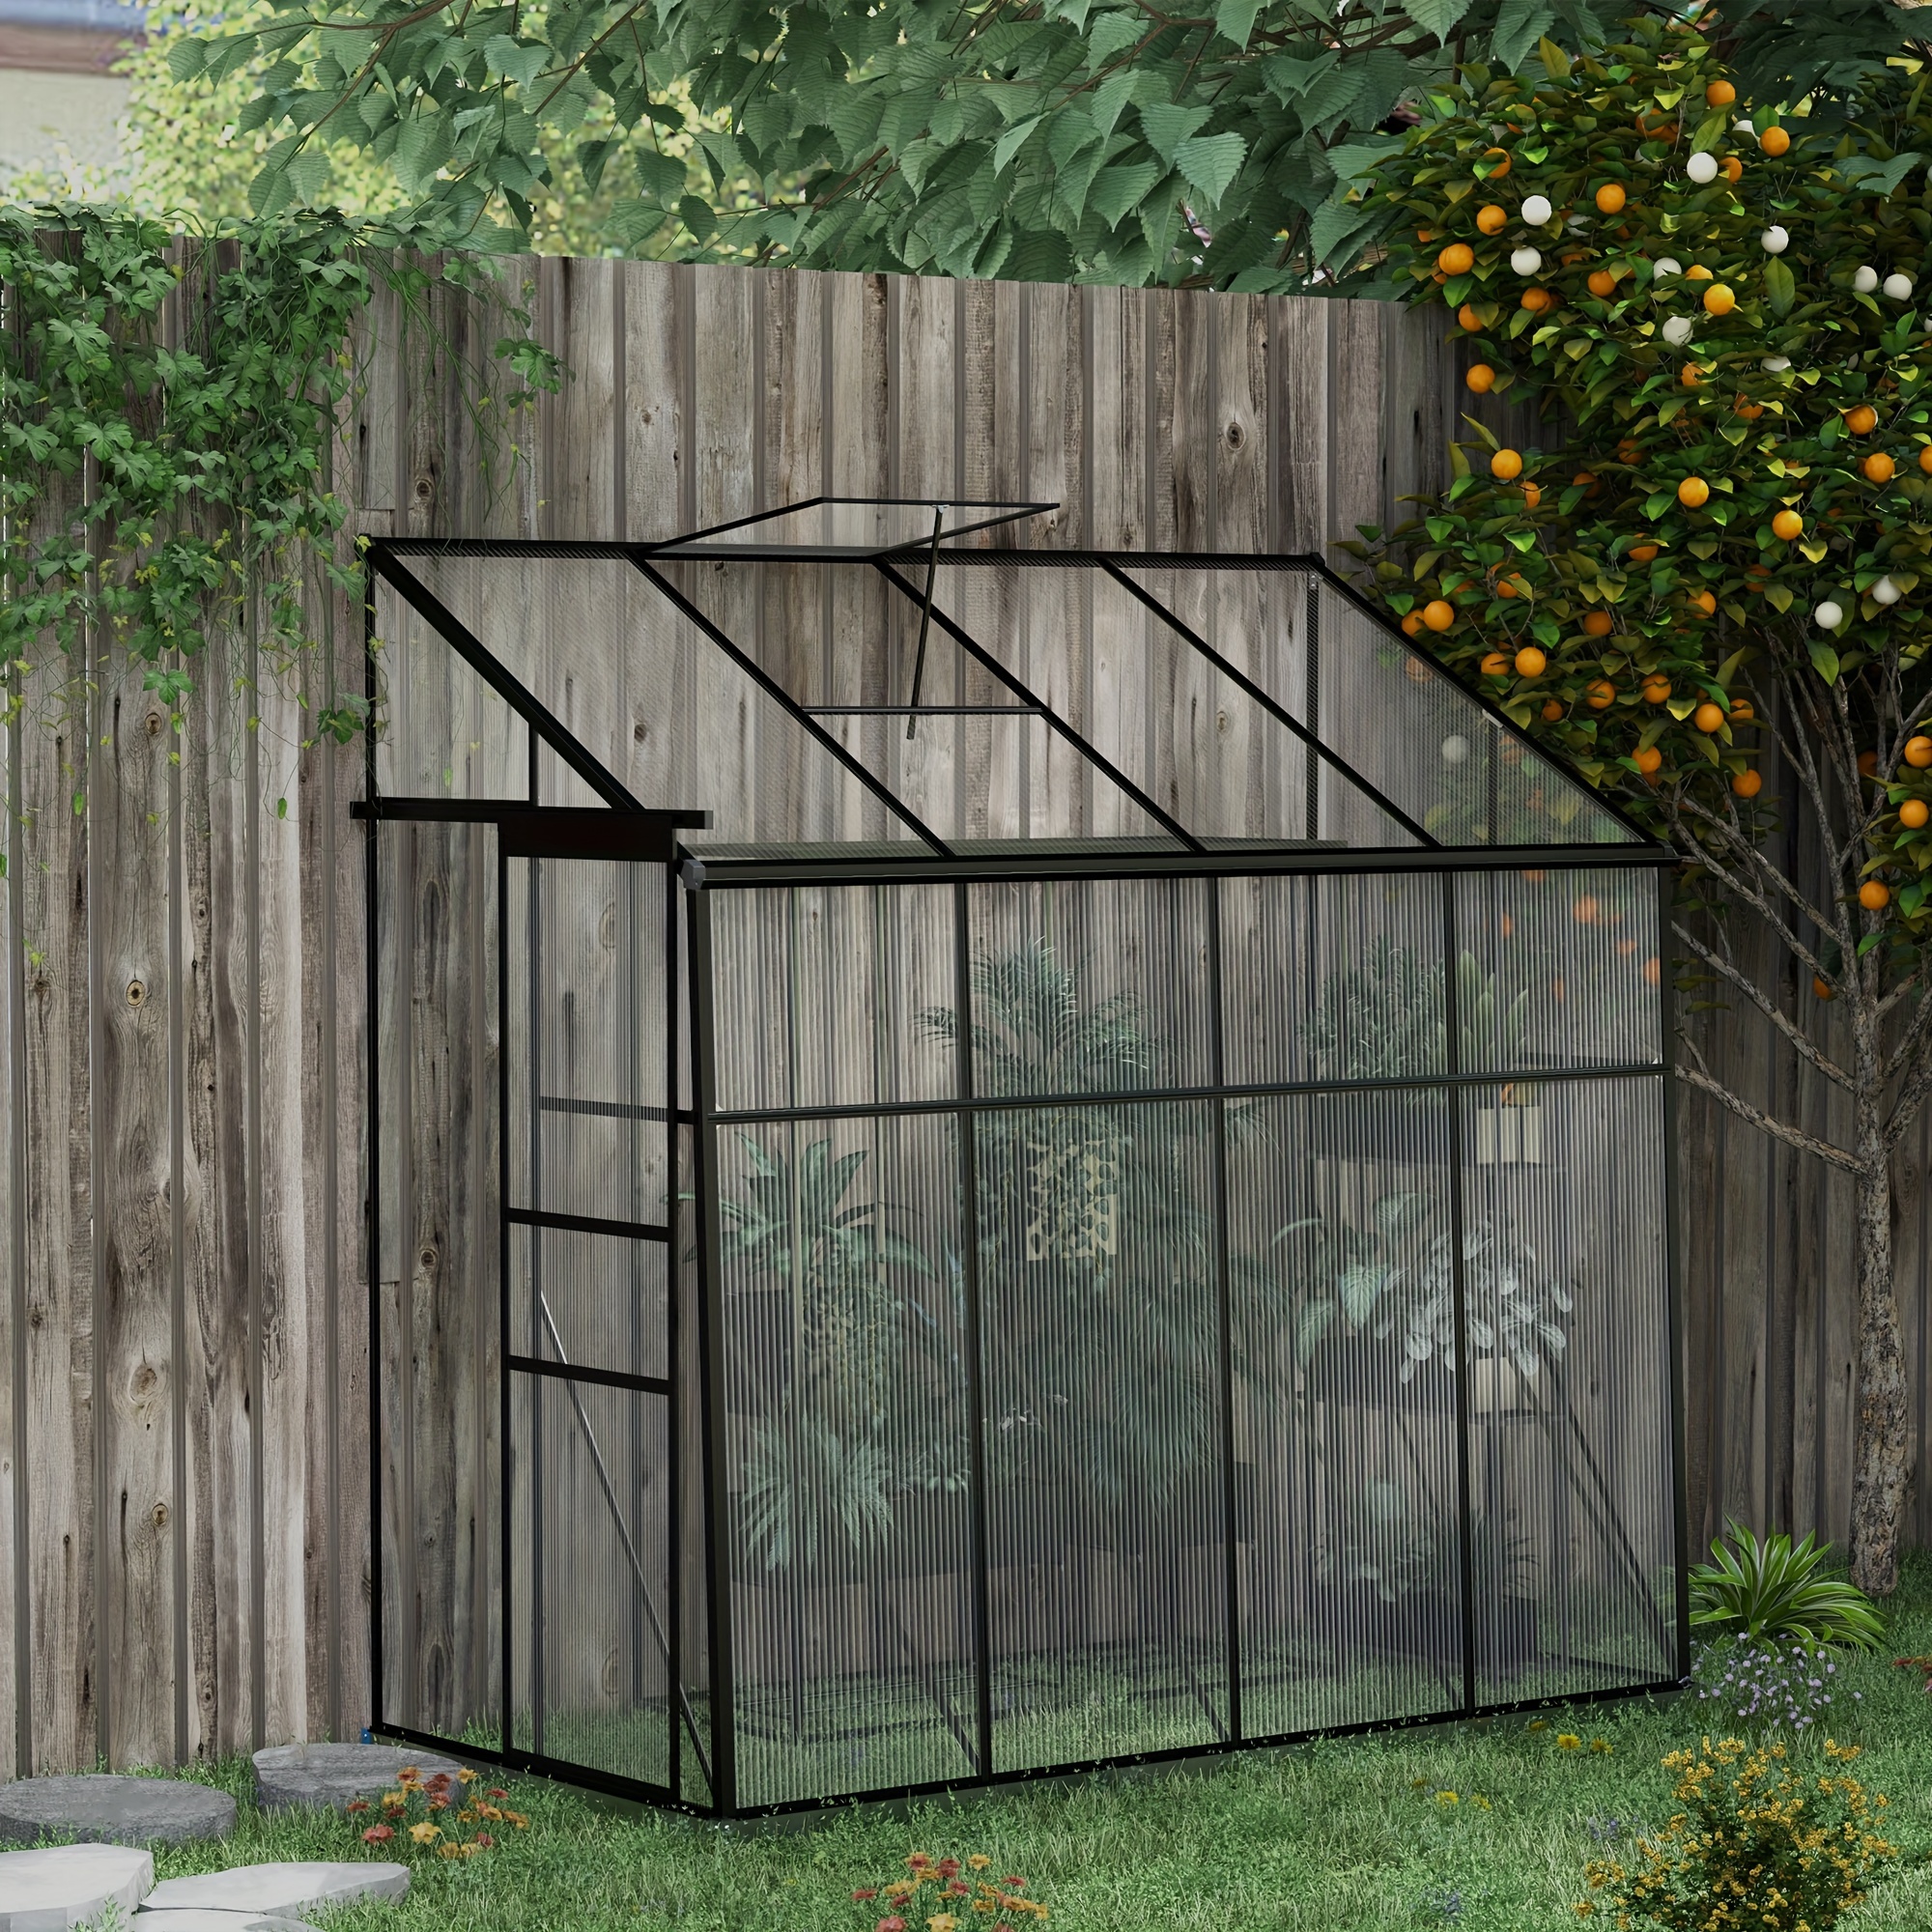 

Outsunny 8' X 4' Lean-to Polycarbonate Greenhouse, Walk-in Hobby Green House With Sliding Door, 5-level Roof Vent, Rain Gutter, Garden Plant Hot House With Aluminum Frame And Foundation, Black